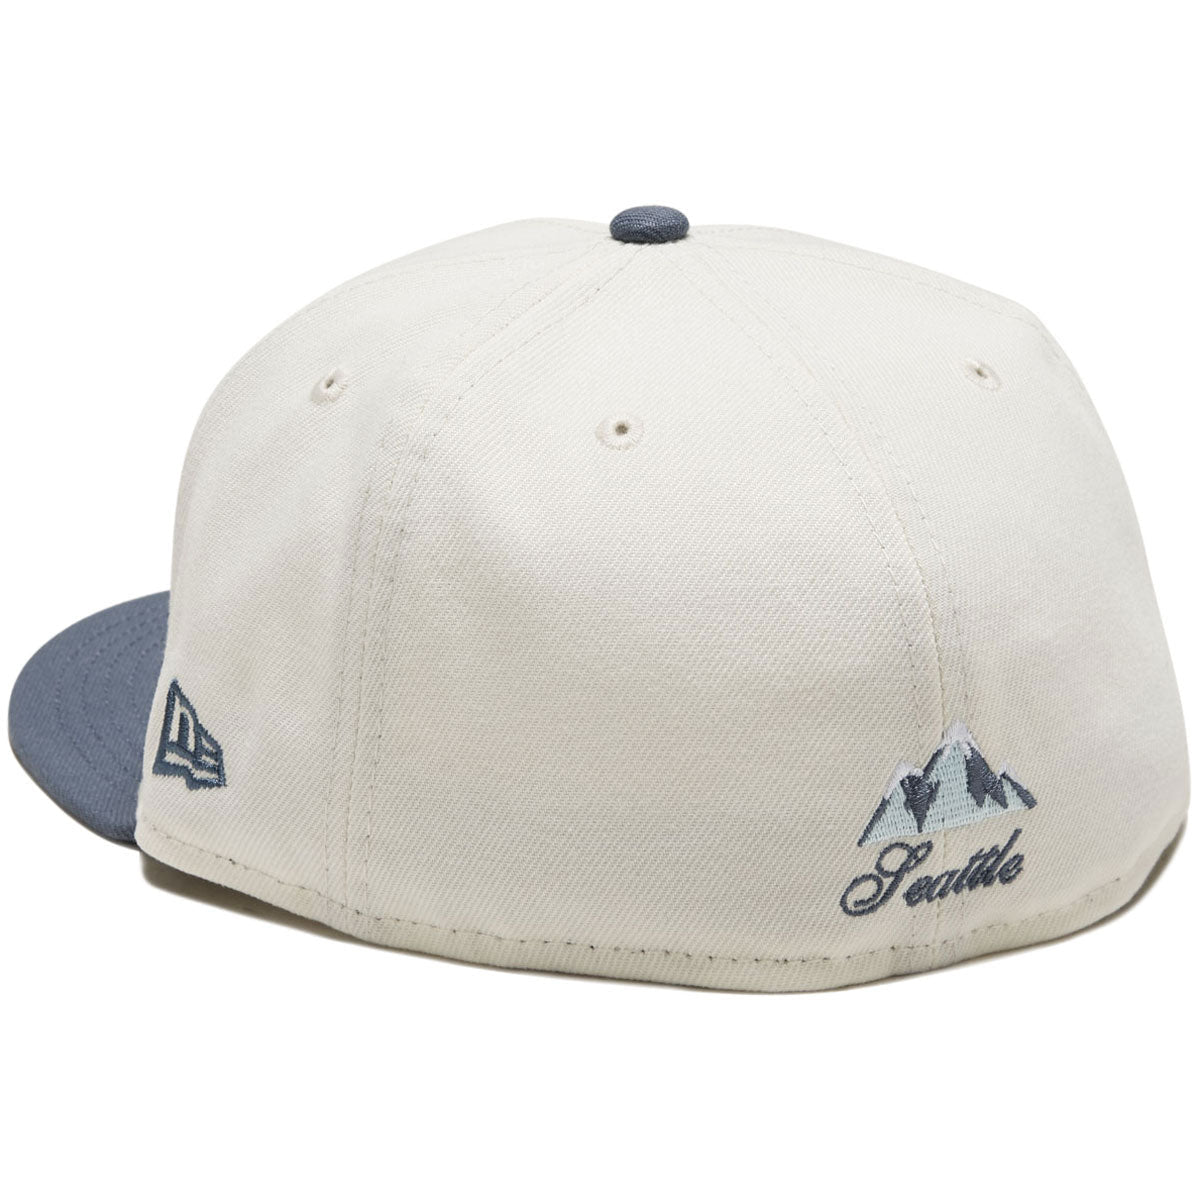 Seattle Mariners Hats, Mariners Gear, Seattle Mariners Pro Shop, Apparel